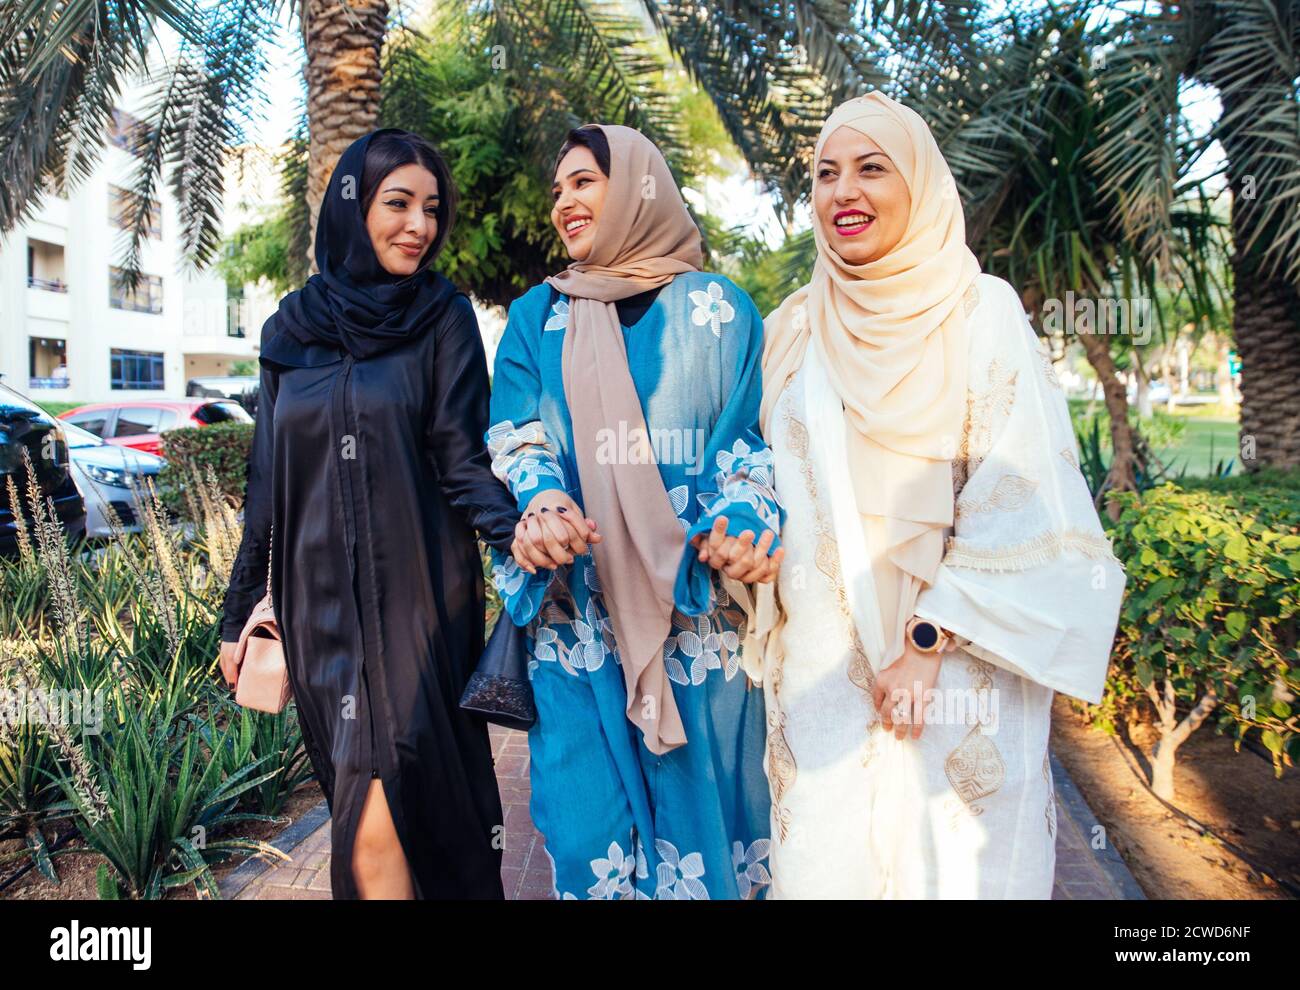 Three Women Friends Going Out In Dubai Girls Wearing The United Arab